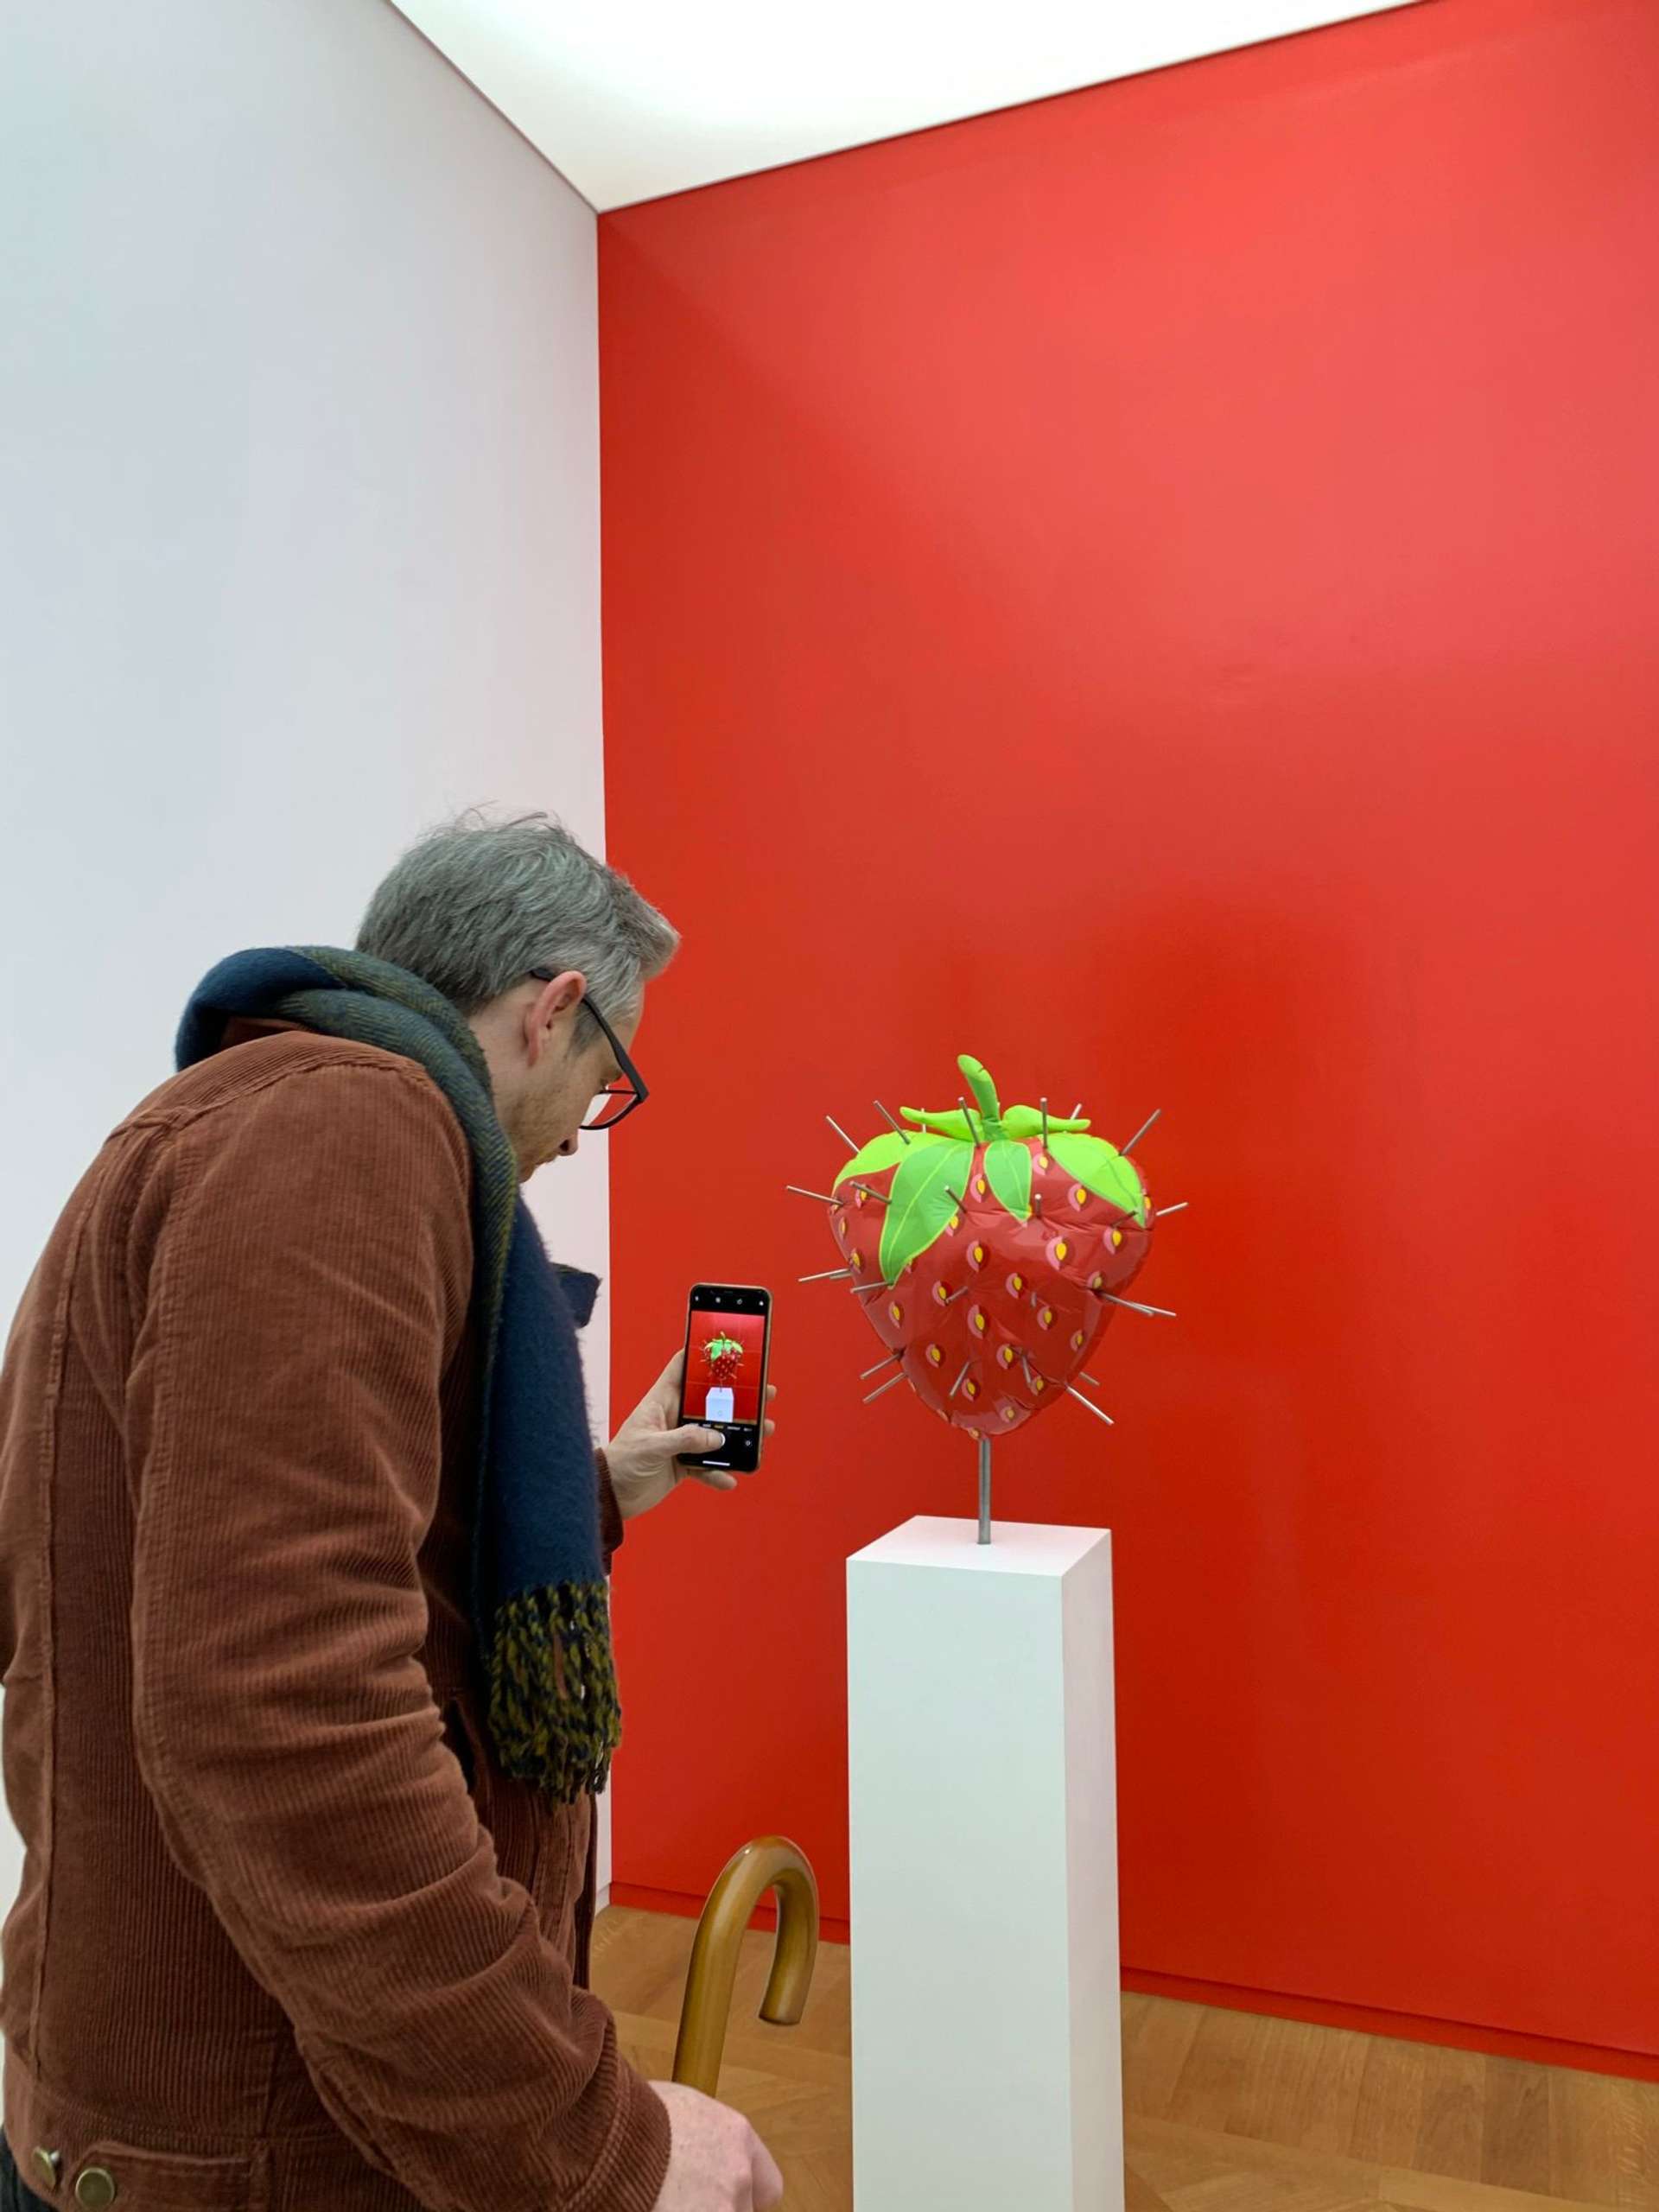 Millennial man taking a photo of a sculpted artwork of a strawberry on his mobile phone.